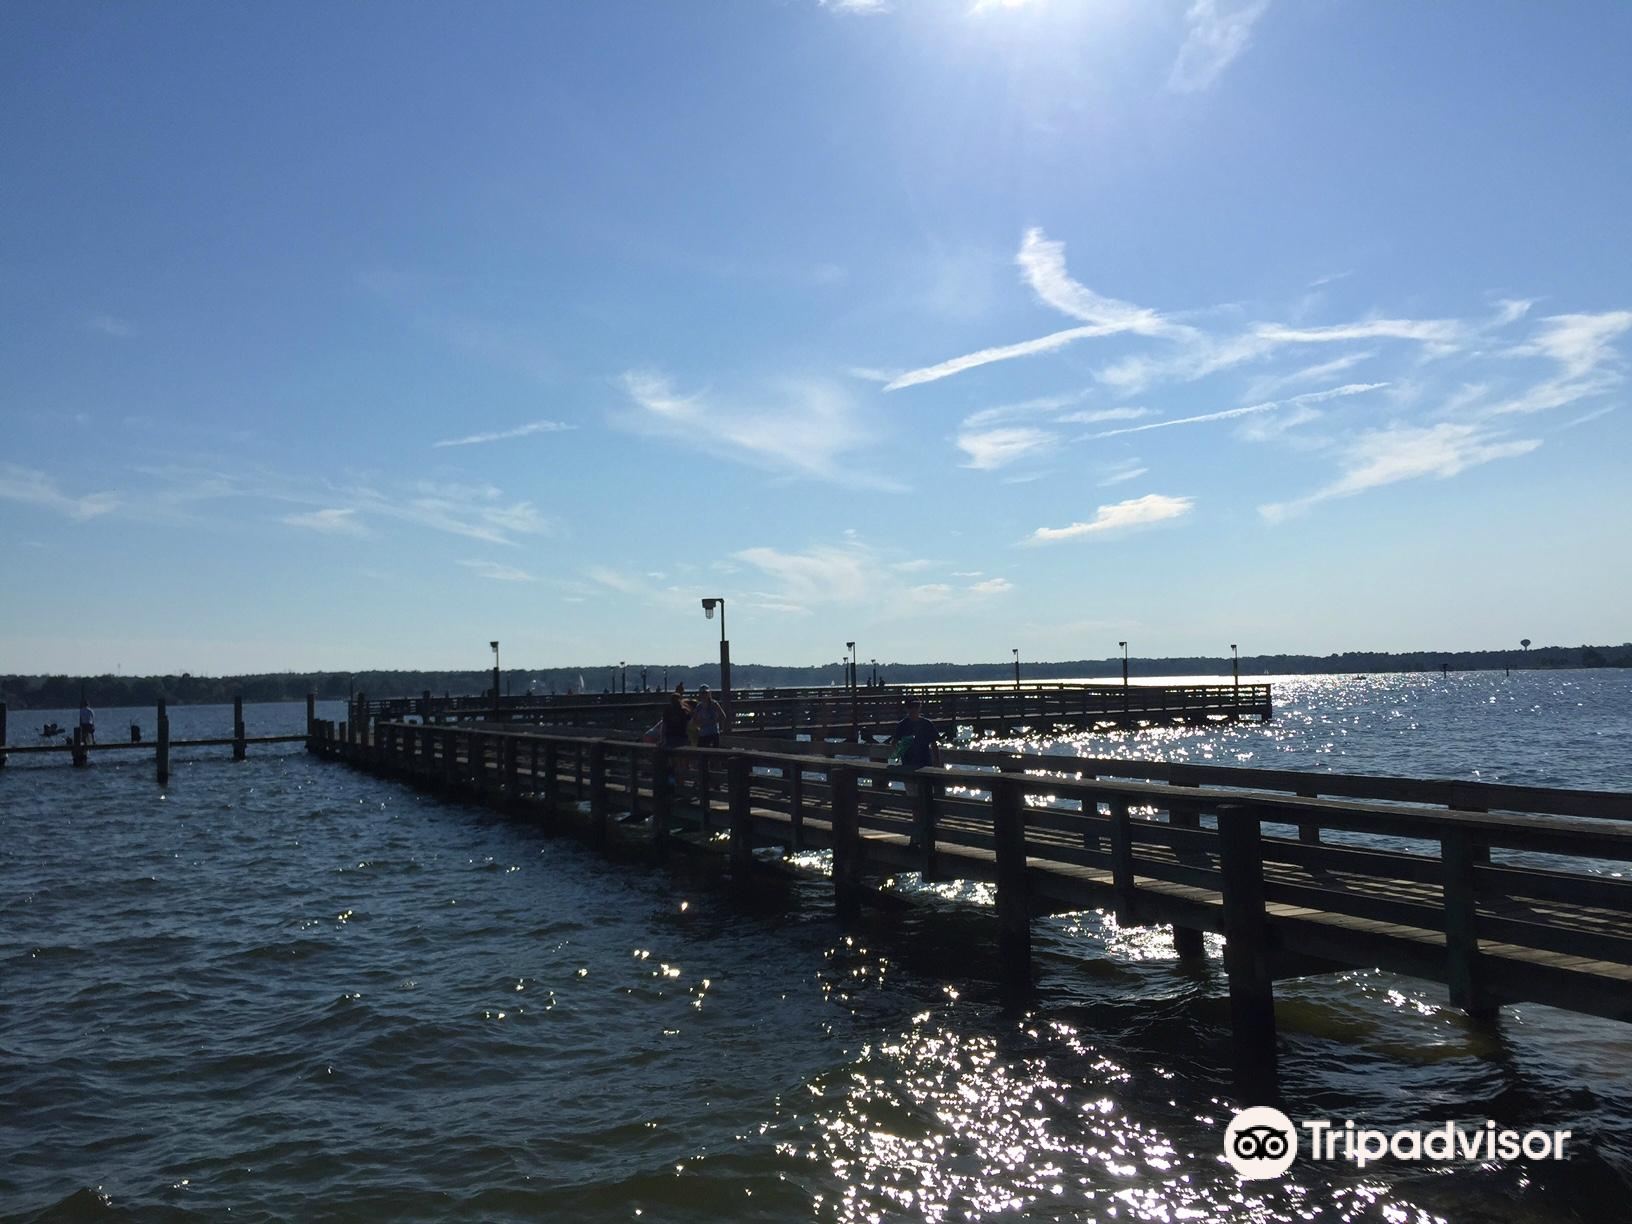 The Pier  Restaurant and River Bar - Solomons Island MD